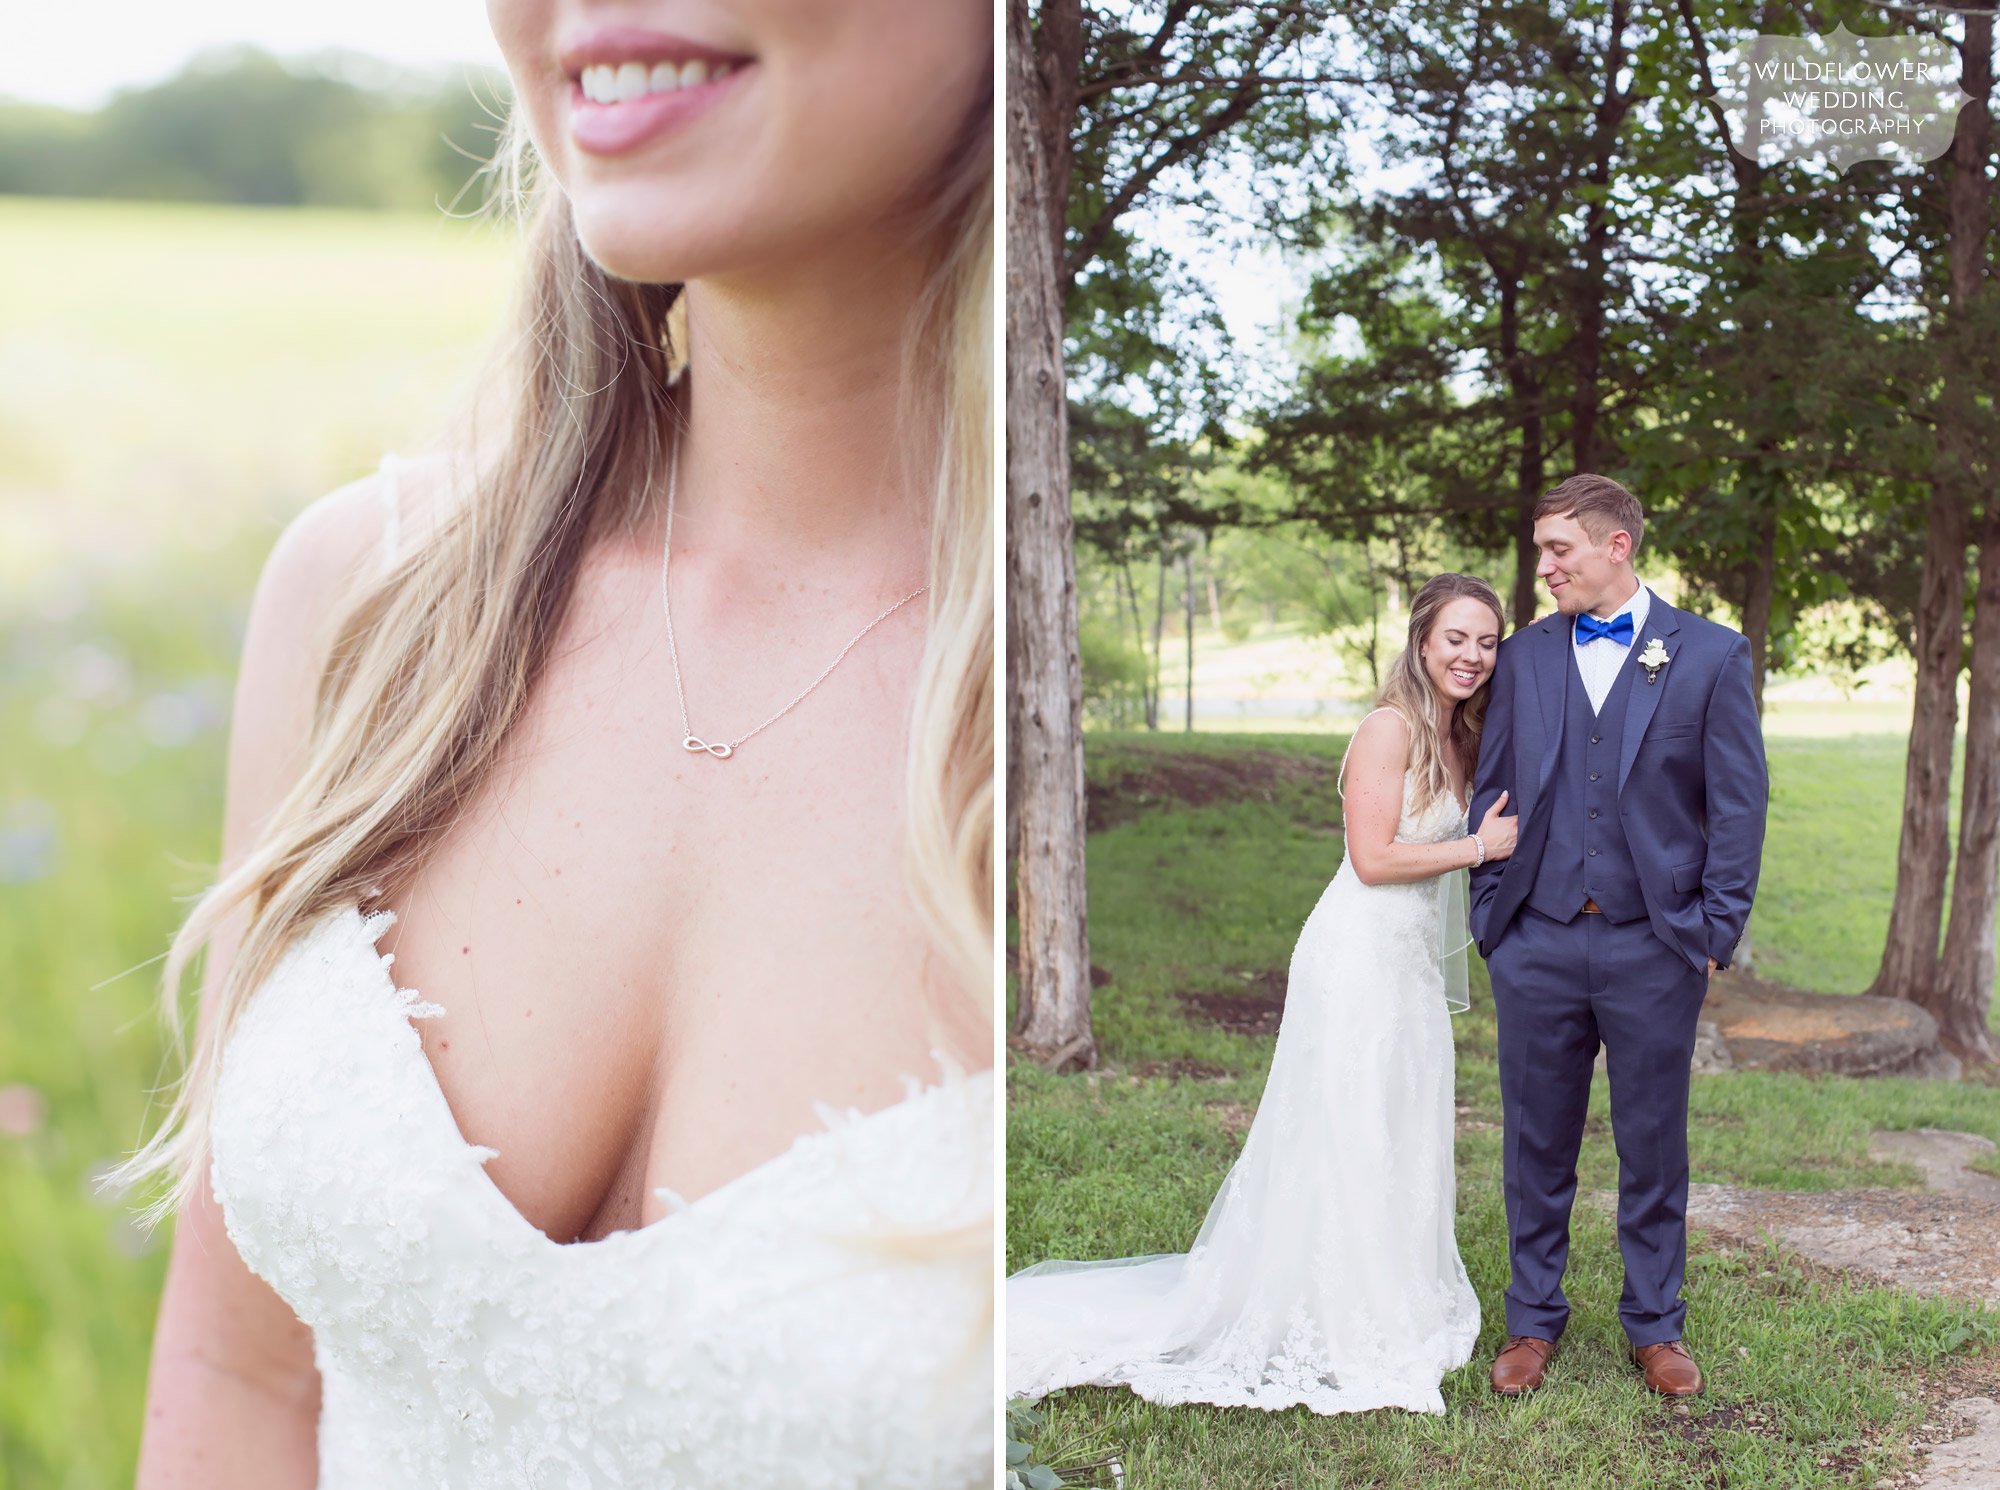 Simple tiffanys figure 8 necklace for this country wedding at the Kempker's Back 40 wedding barn venue.